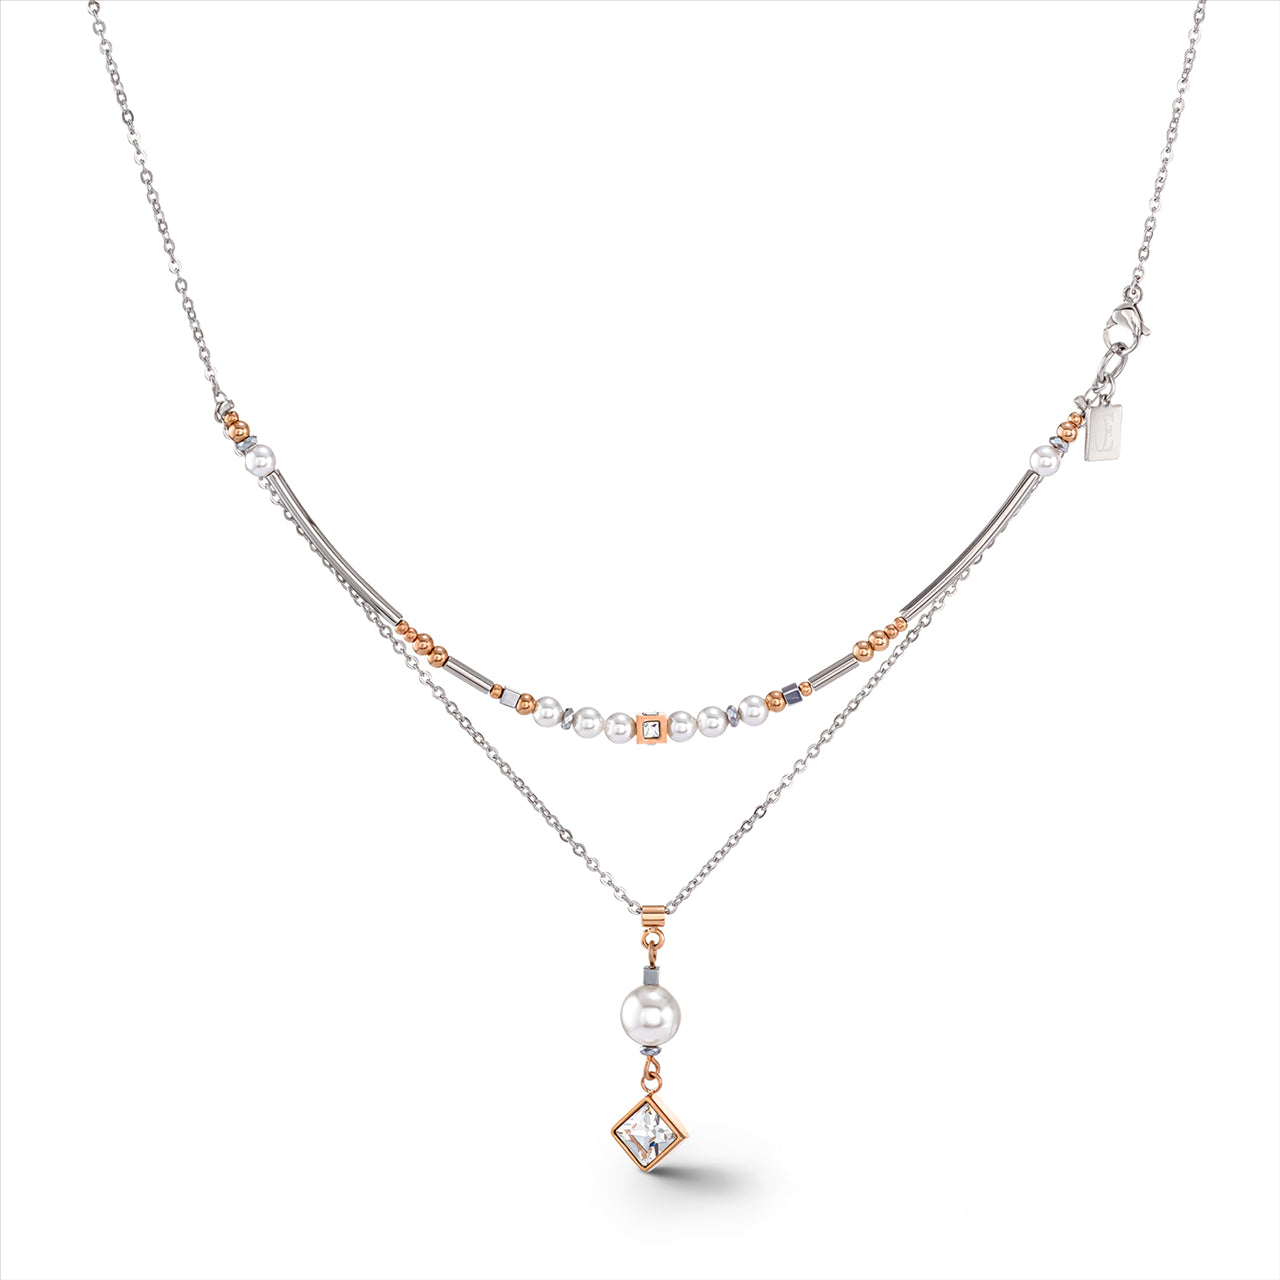 Coeur De Lion - Necklace St/St & Rose Gold Plated, With Crystal Glass & European Crystal Pearls, 45Cm Long